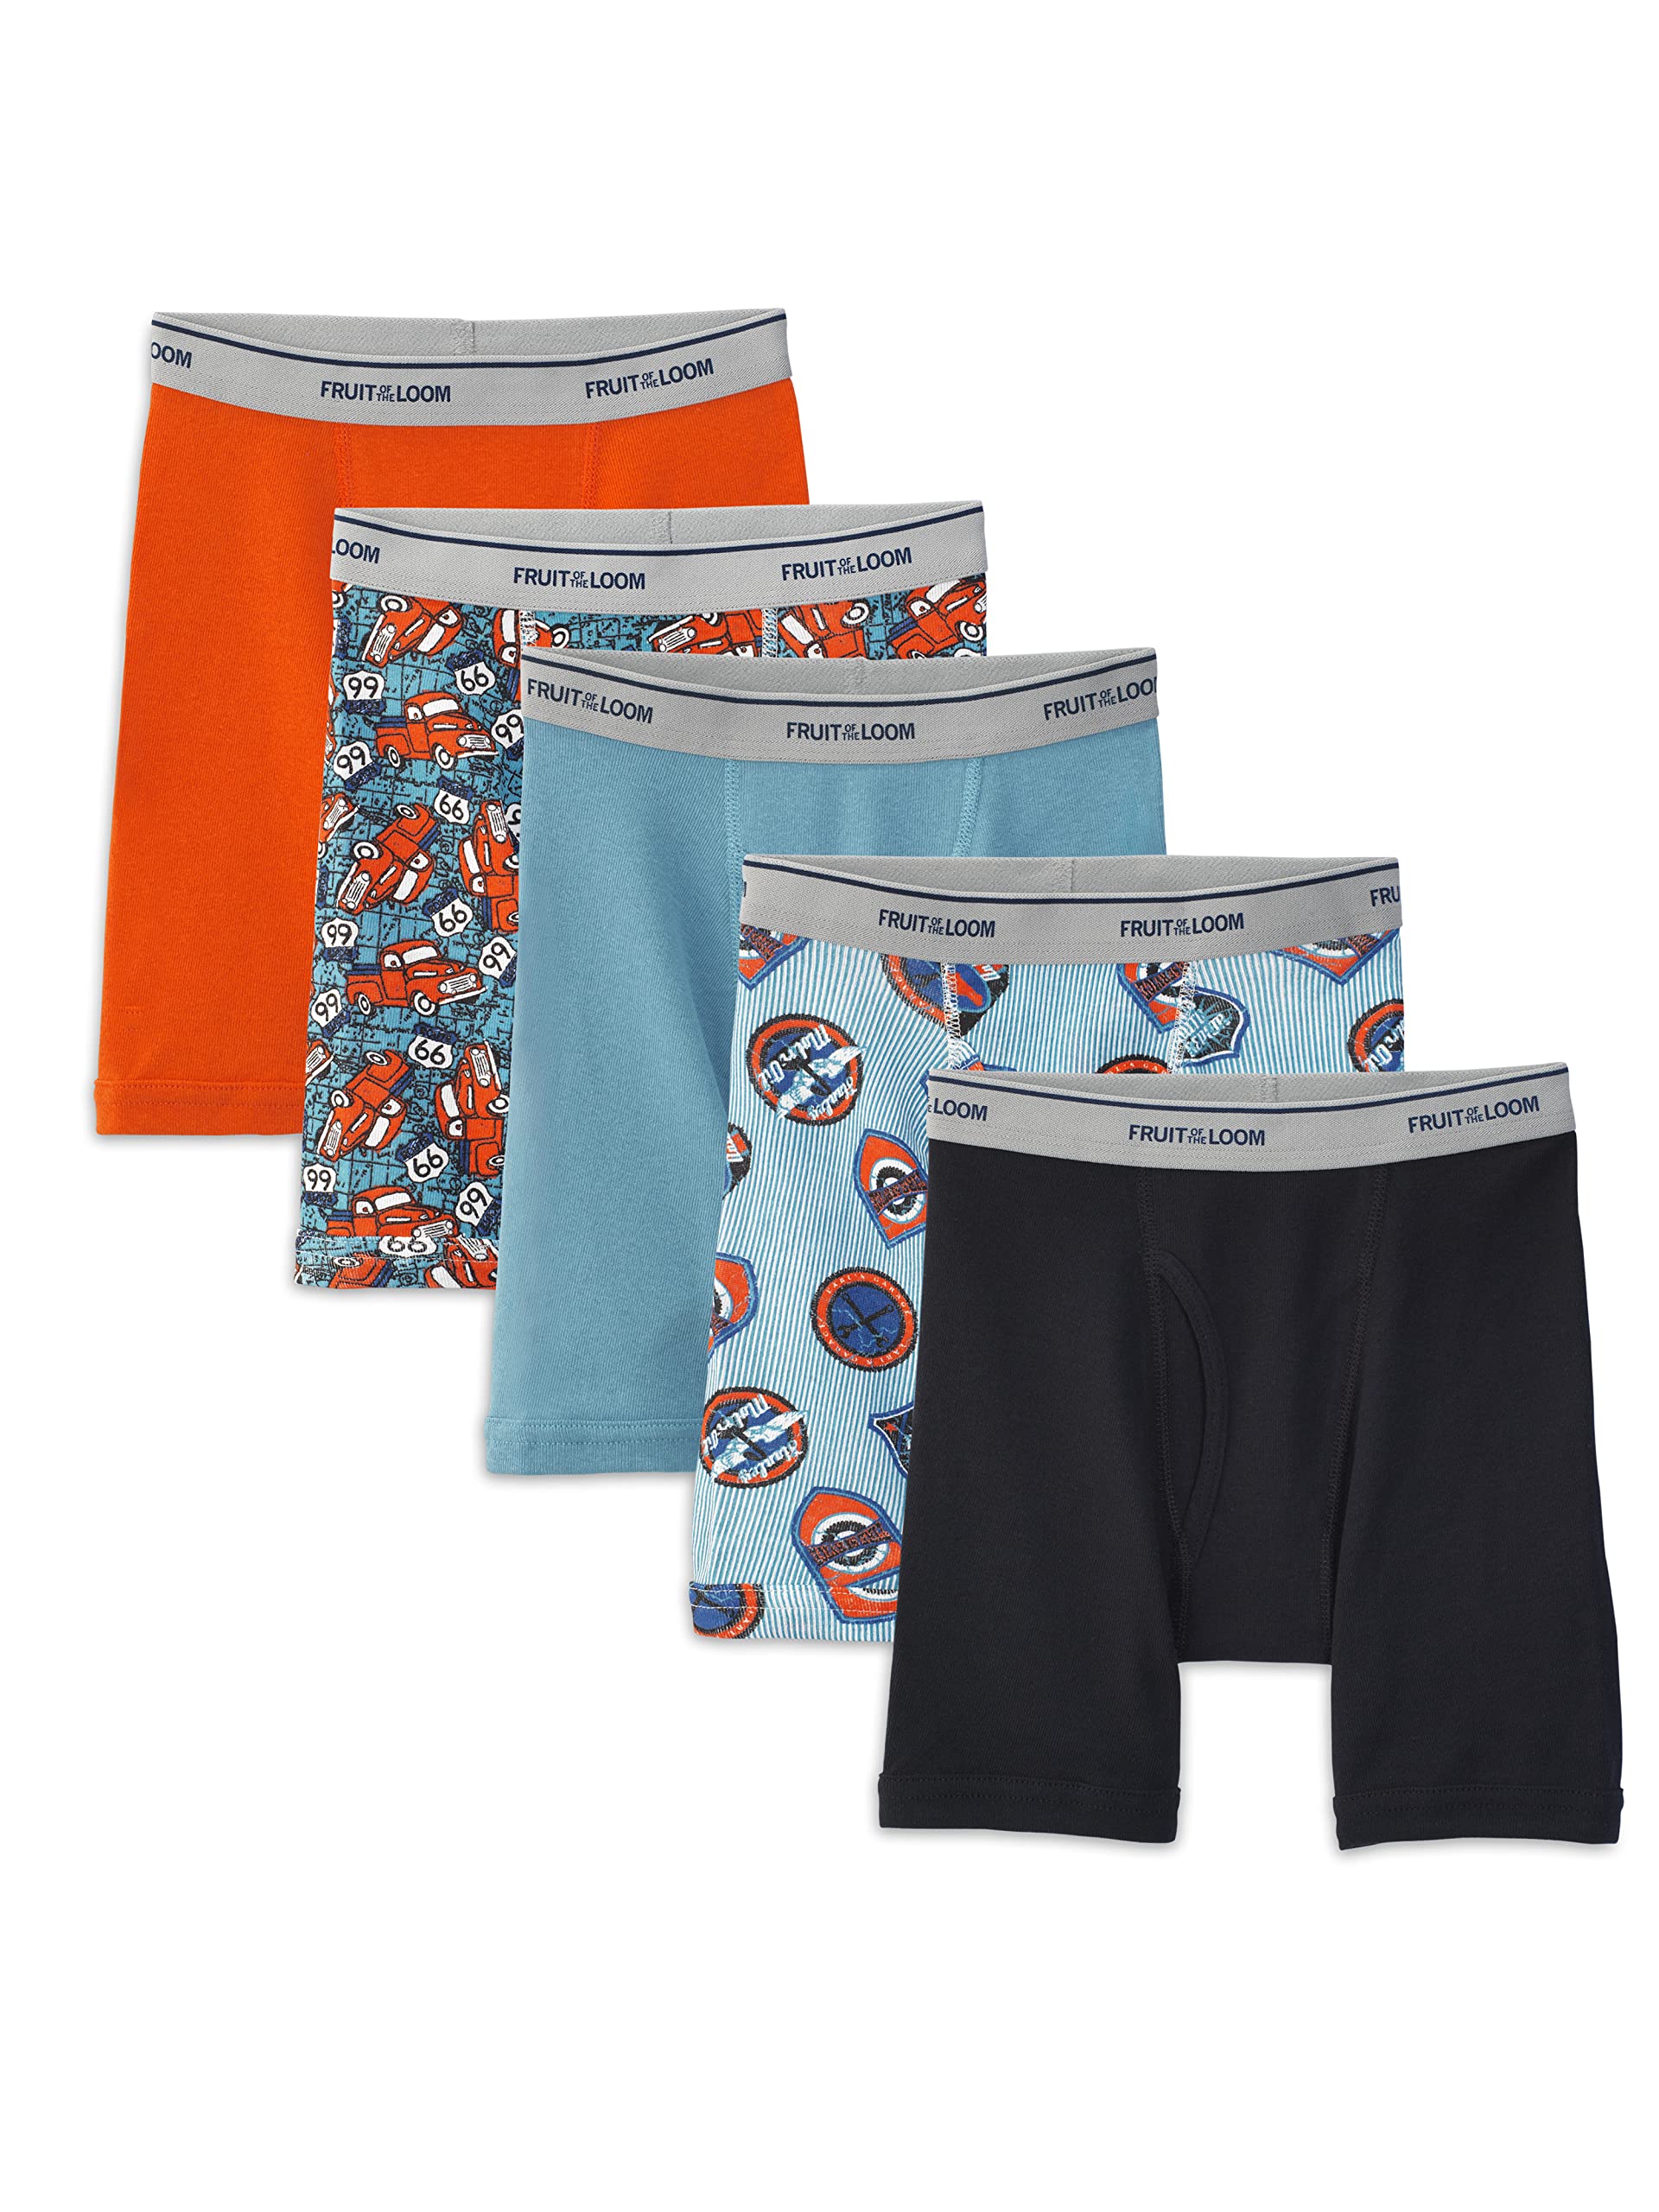 Fruit of the Loom Boys' 5 Pack Assorted Print Boxer Briefs